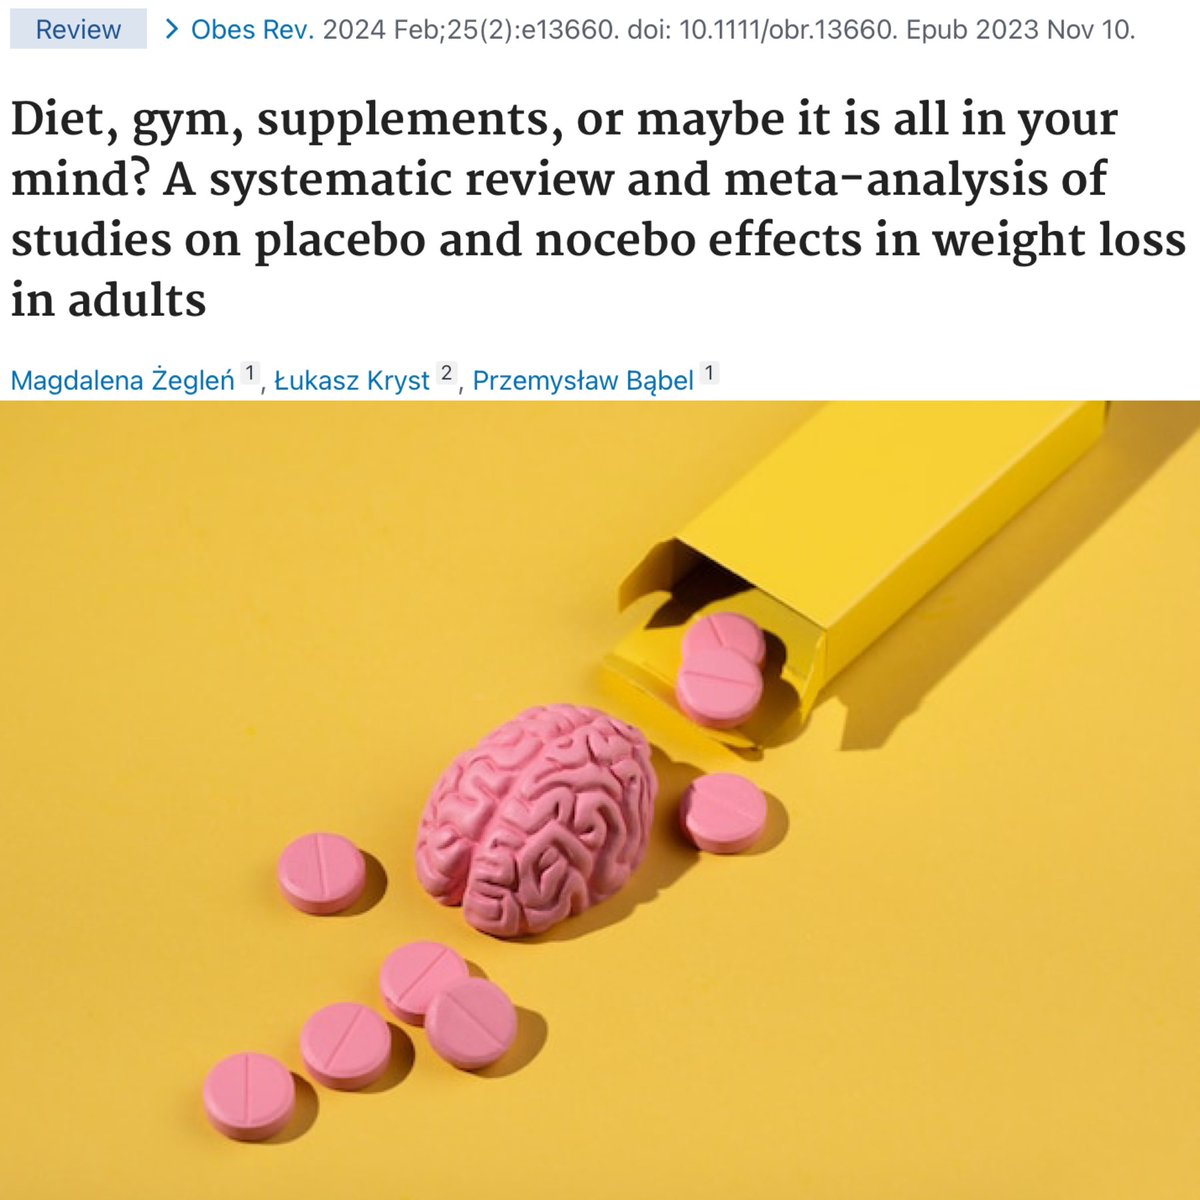 Diet, gym, supplements, or maybe it is all in your mind? A systematic review and meta-analysis of studies on placebo and nocebo effects in weight loss in adults pubmed.ncbi.nlm.nih.gov/37950372/